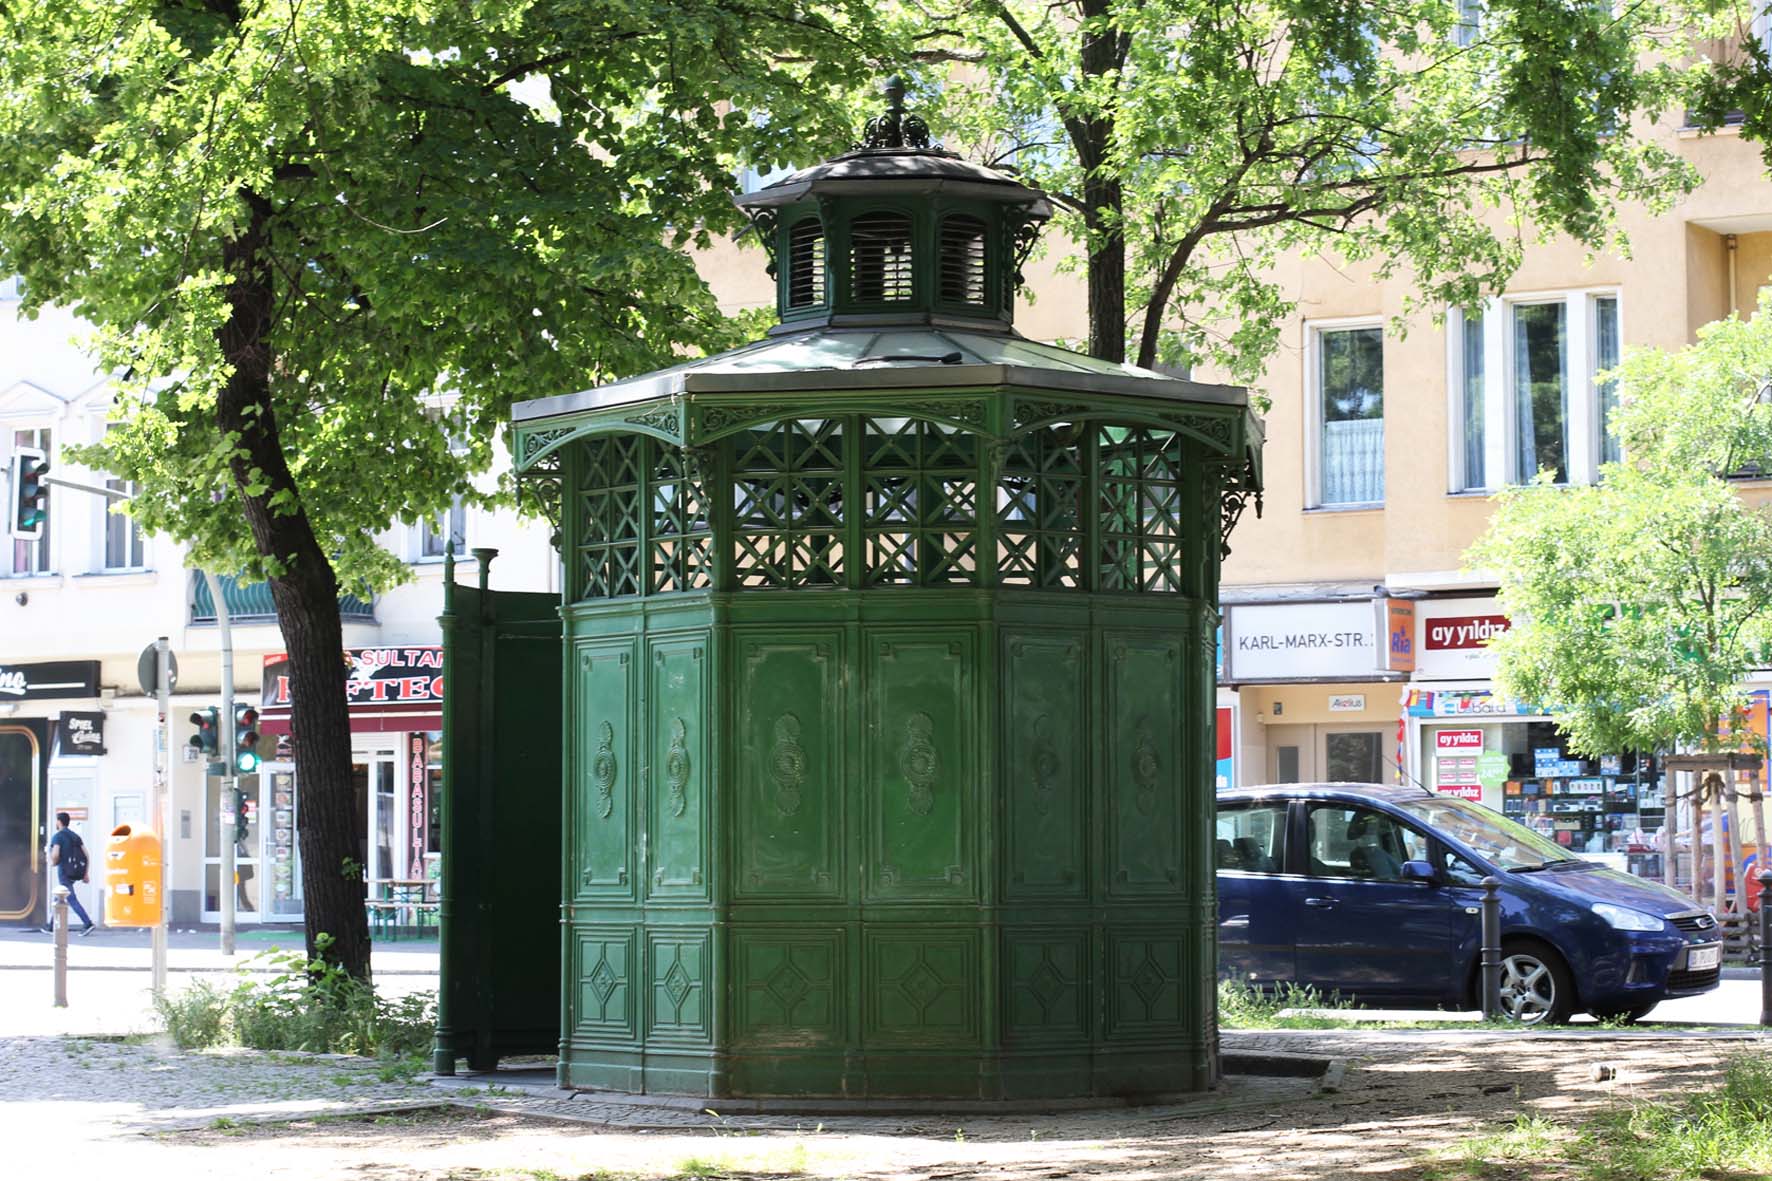 Café Achteck - Karl-Marx-Strasse - an example of Berlin's classic 19th century green cast iron public toilets